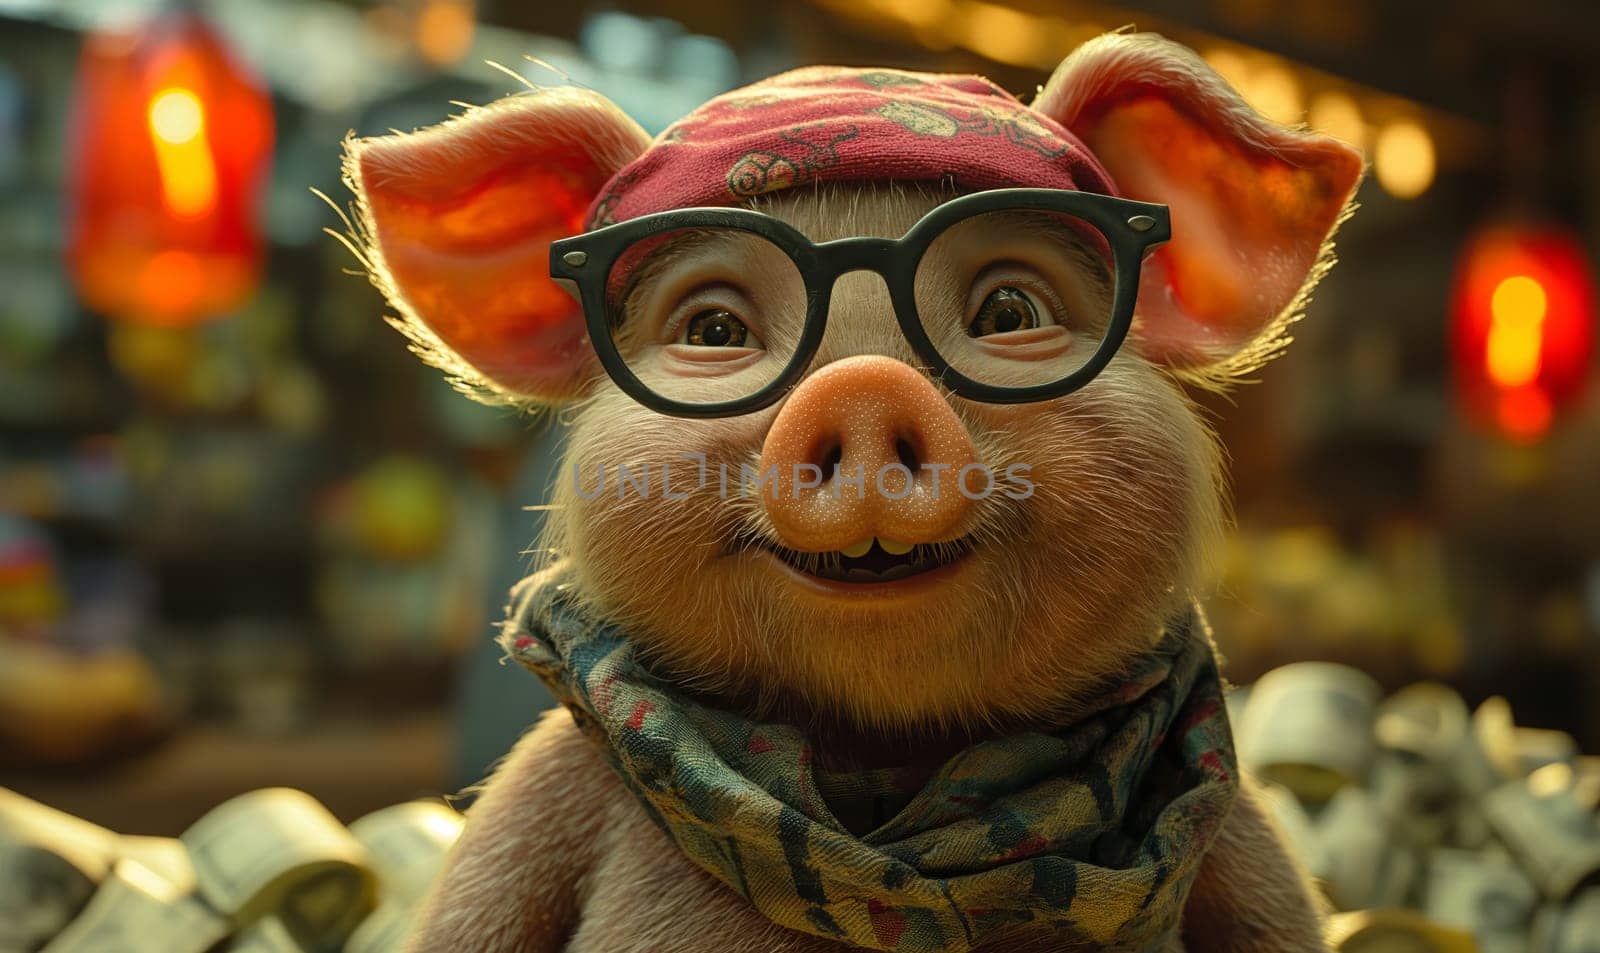 Stylish Pig With Glasses and Scarf by Fischeron